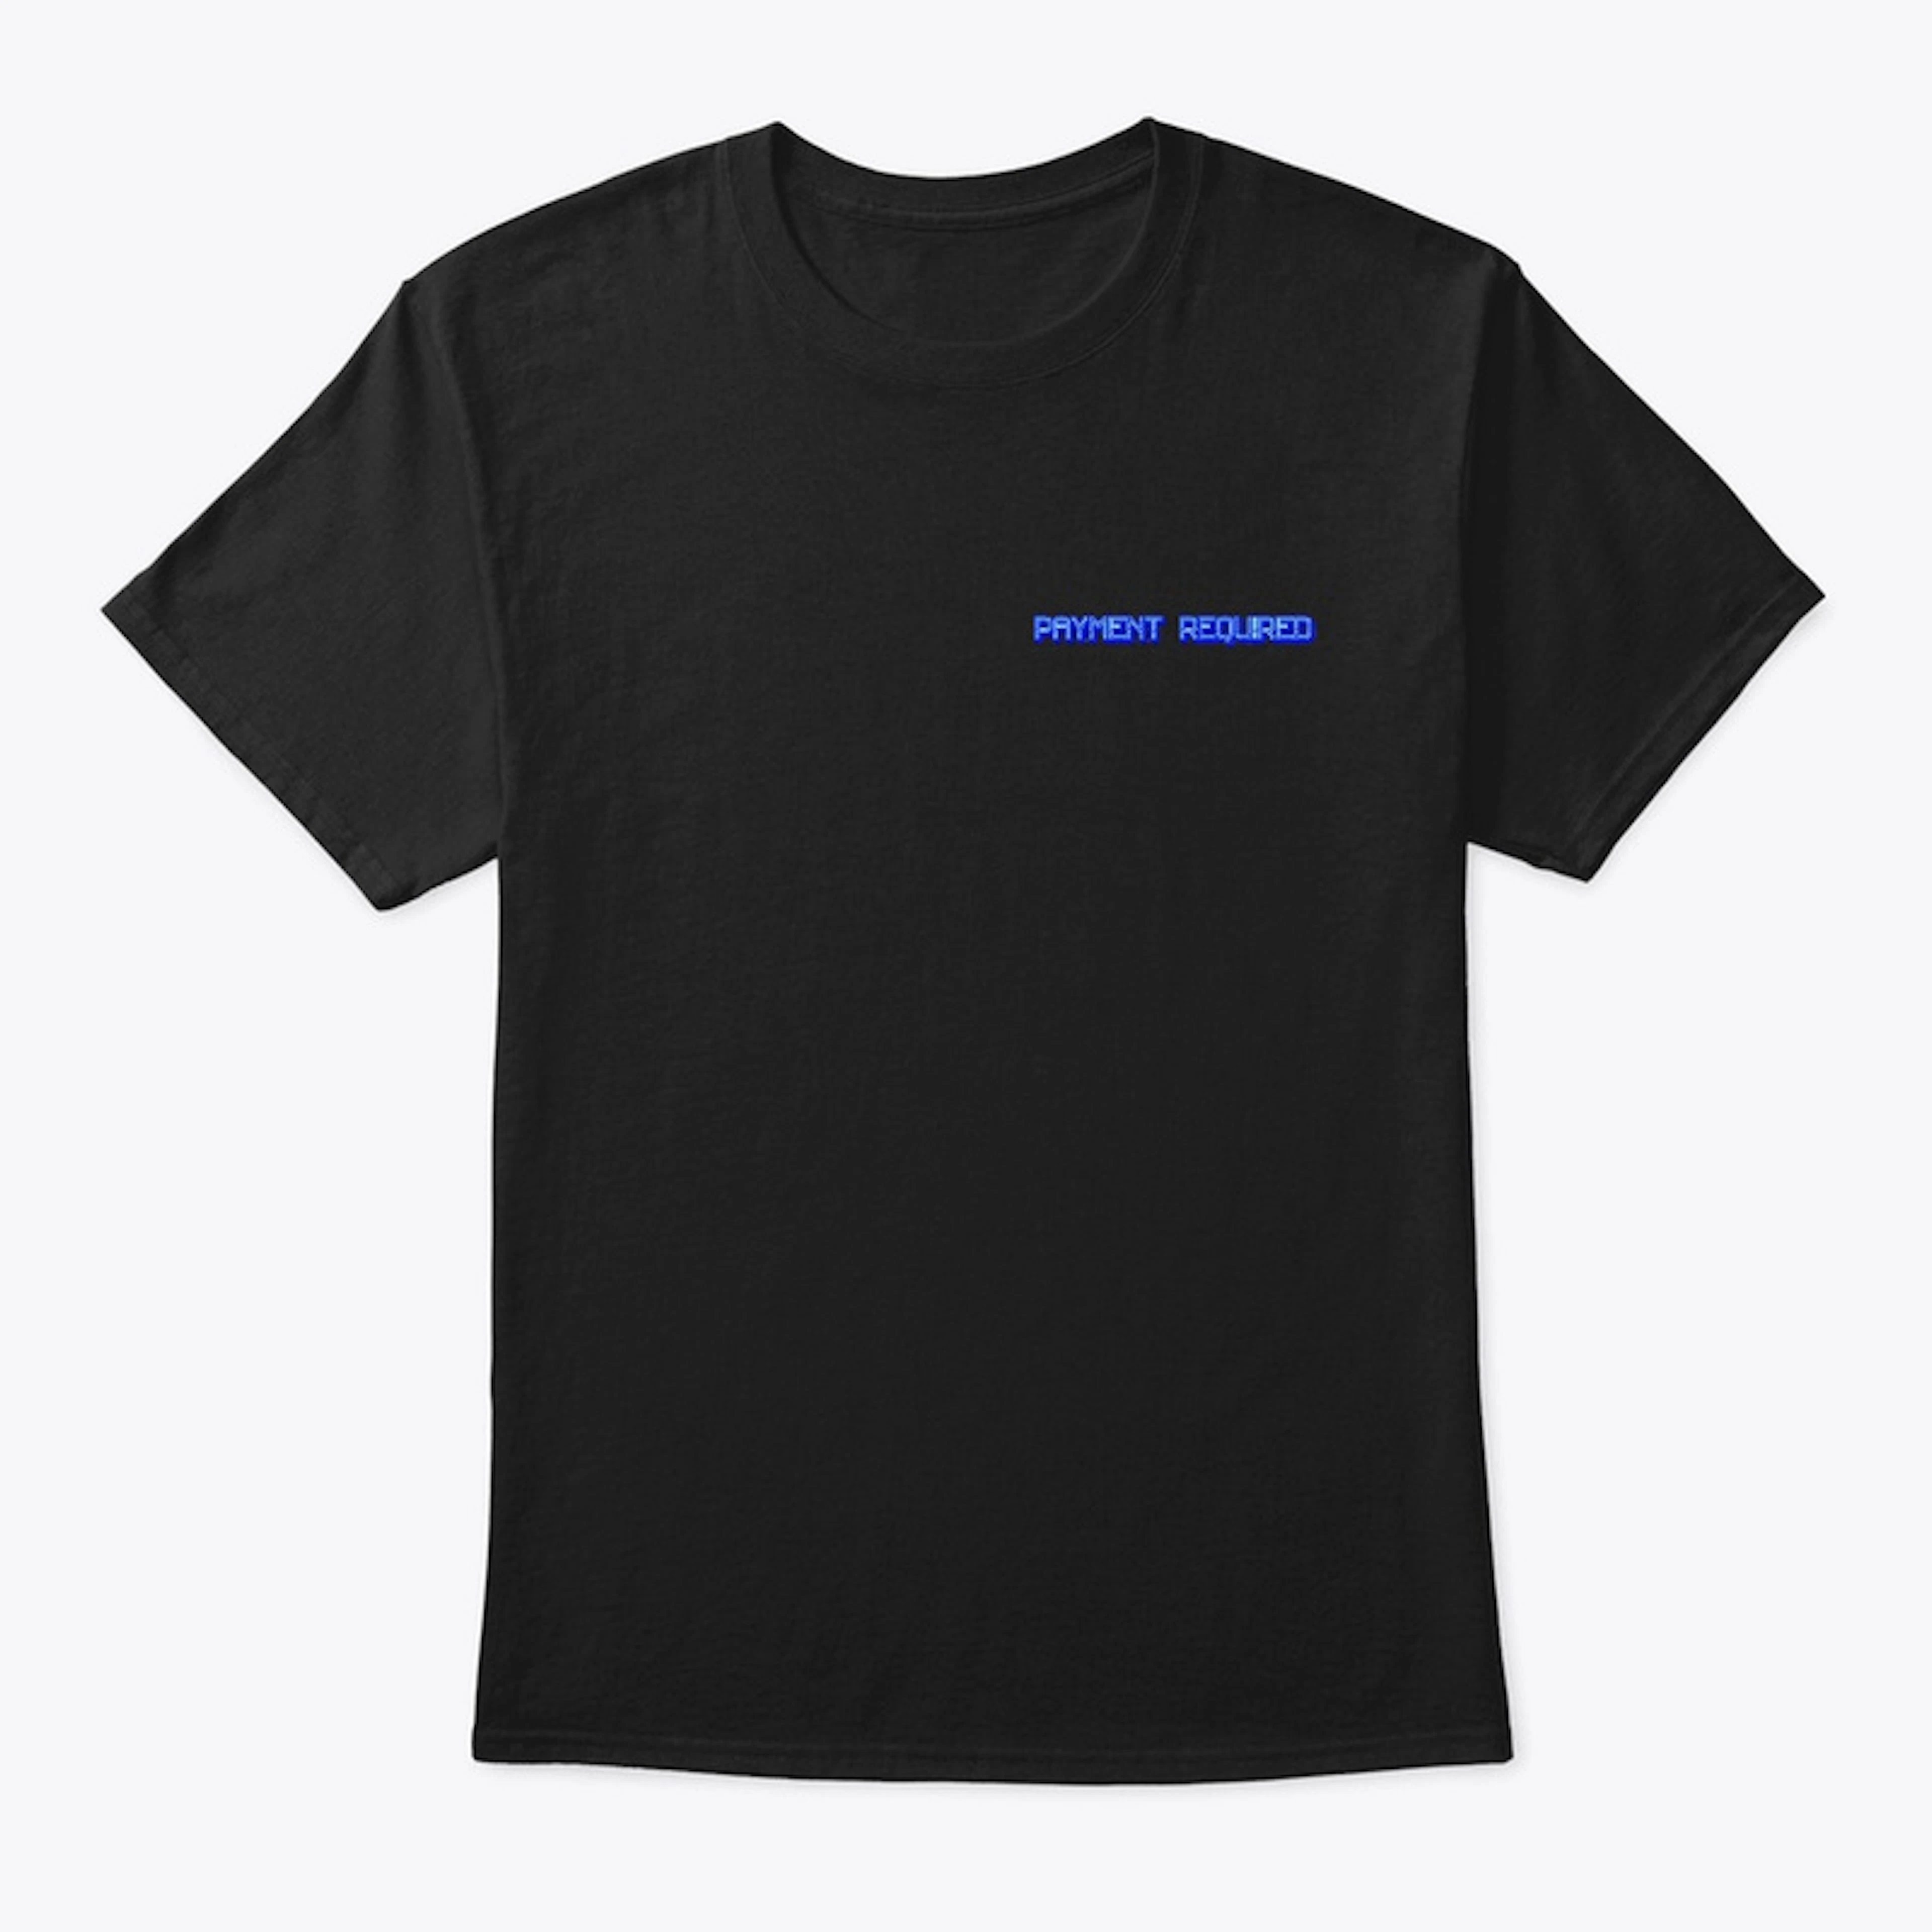 PAST DUE PAYMENT REQUIRED TEE